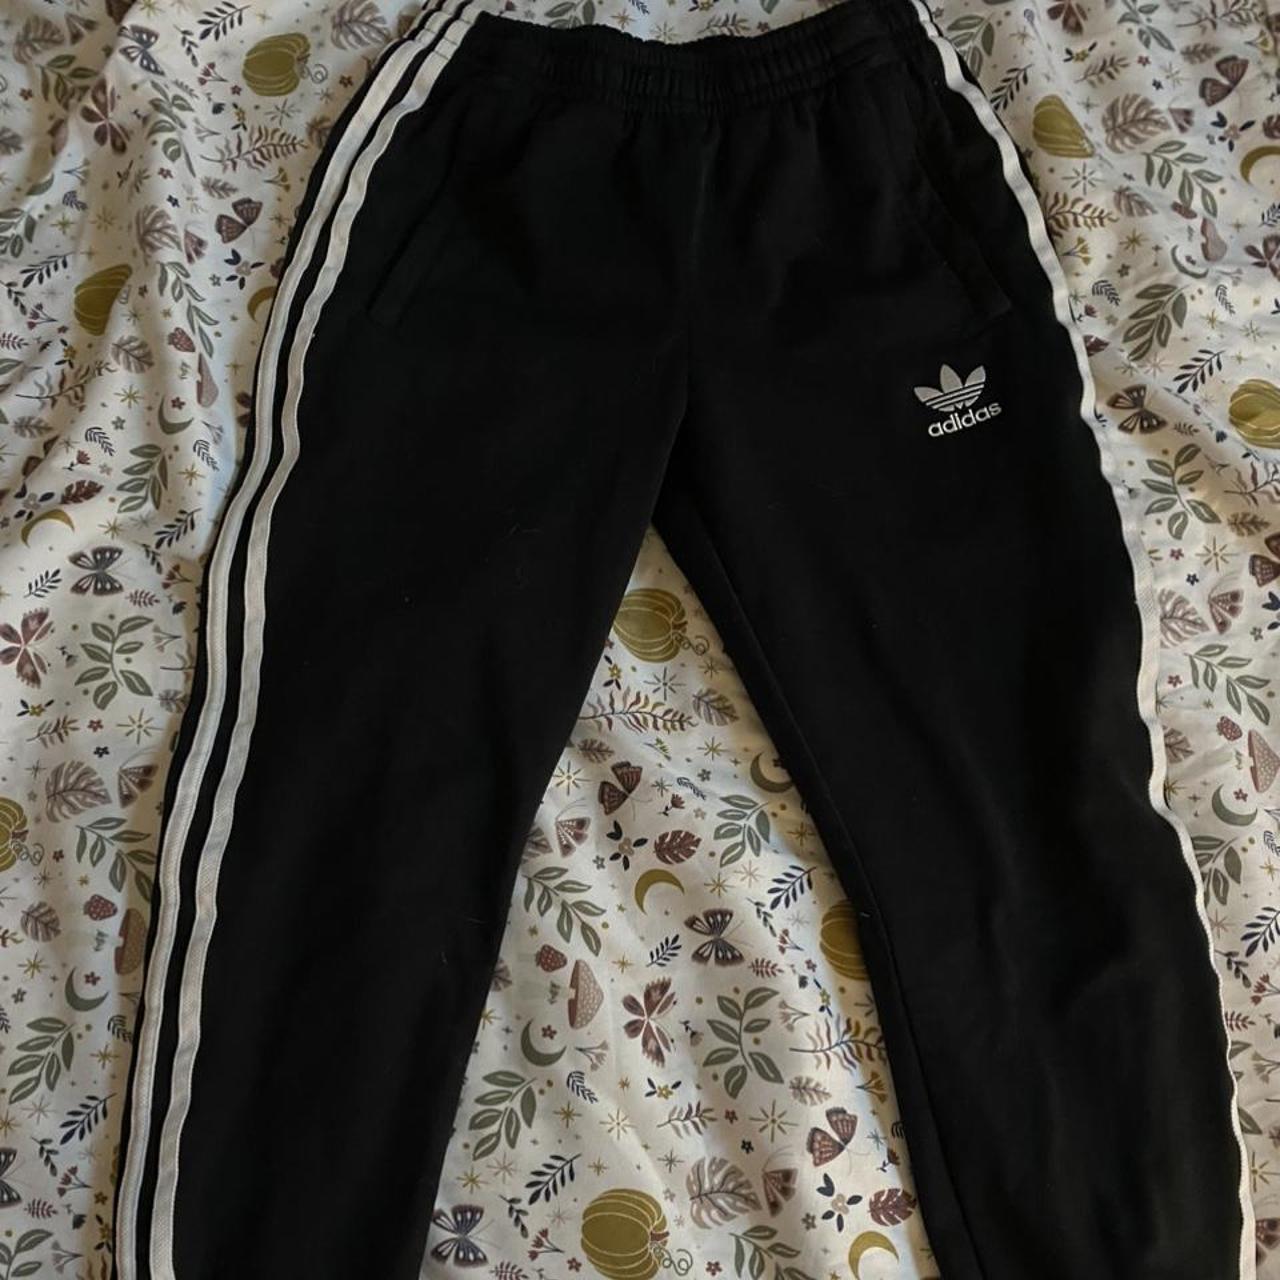 Adidas pants 🖤 - like new - could fit a waist 26-... - Depop